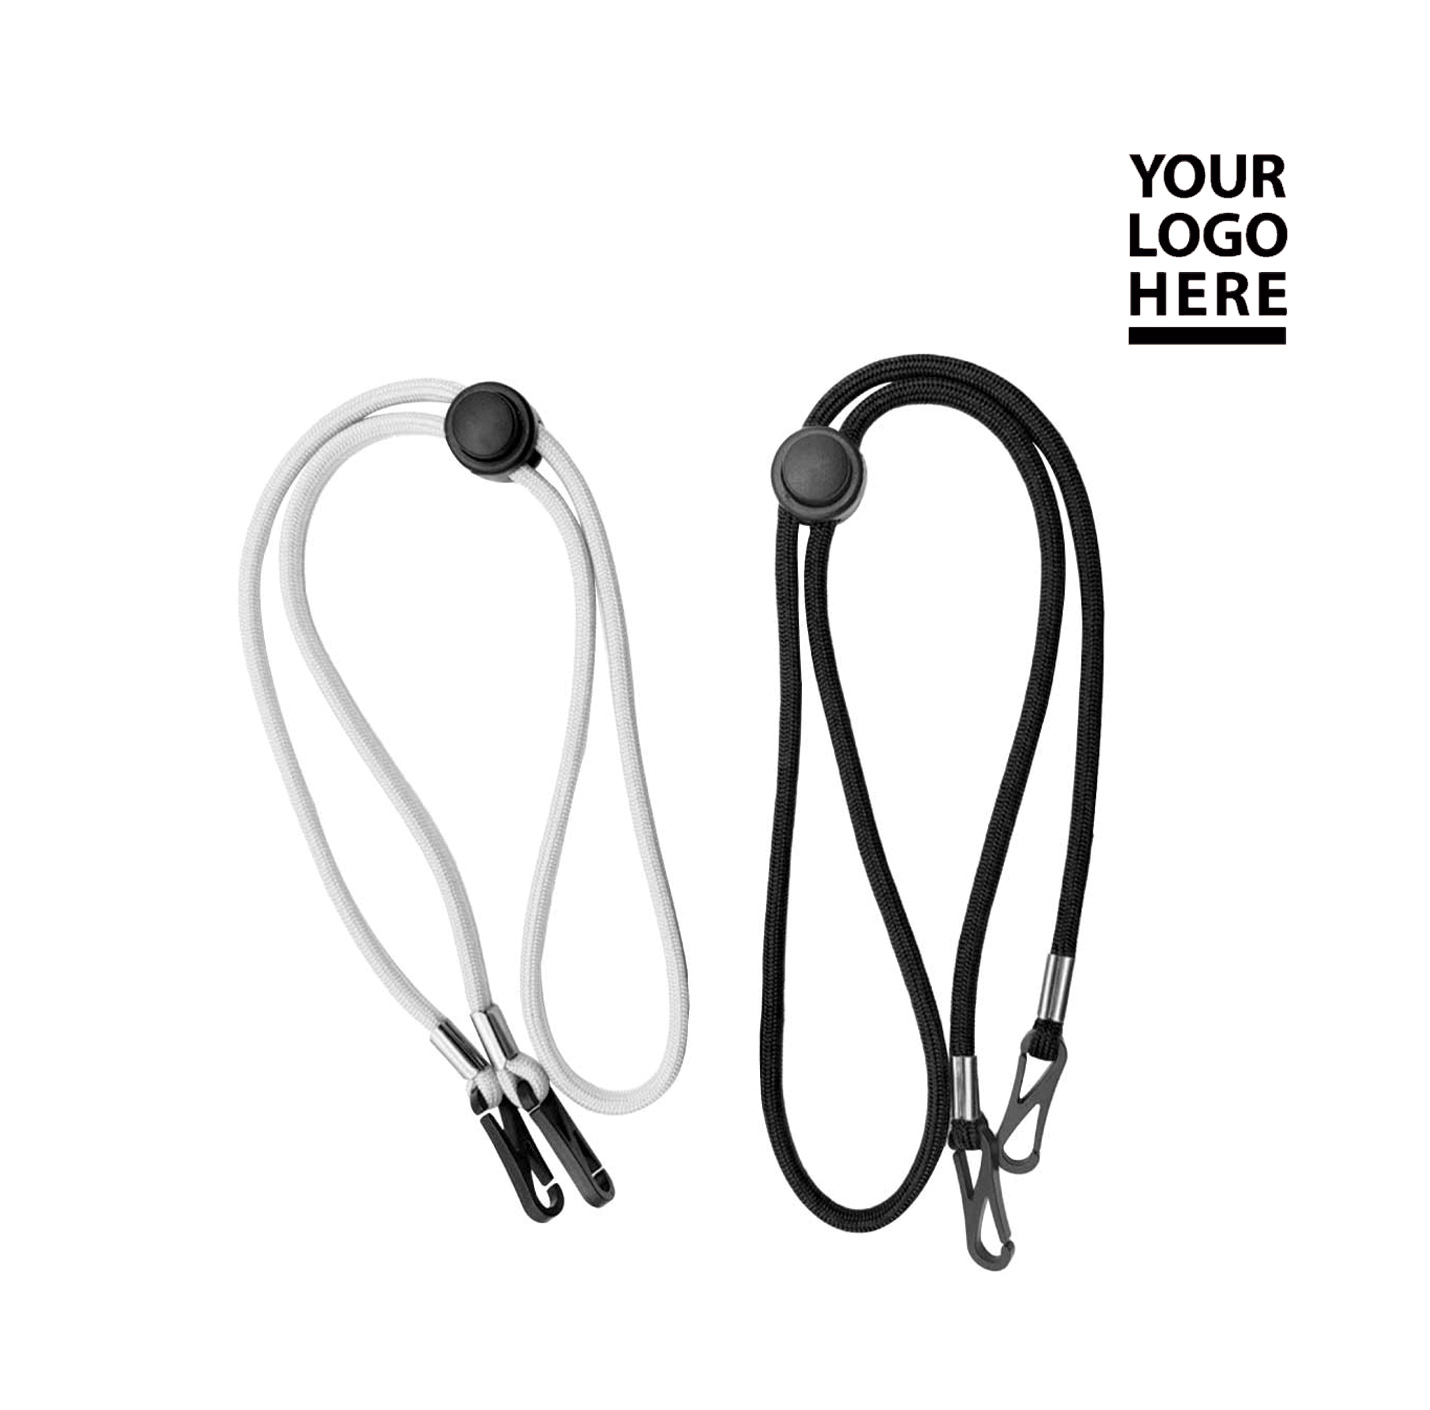 Double Hook Cord Lanyards with Adjustable Lock